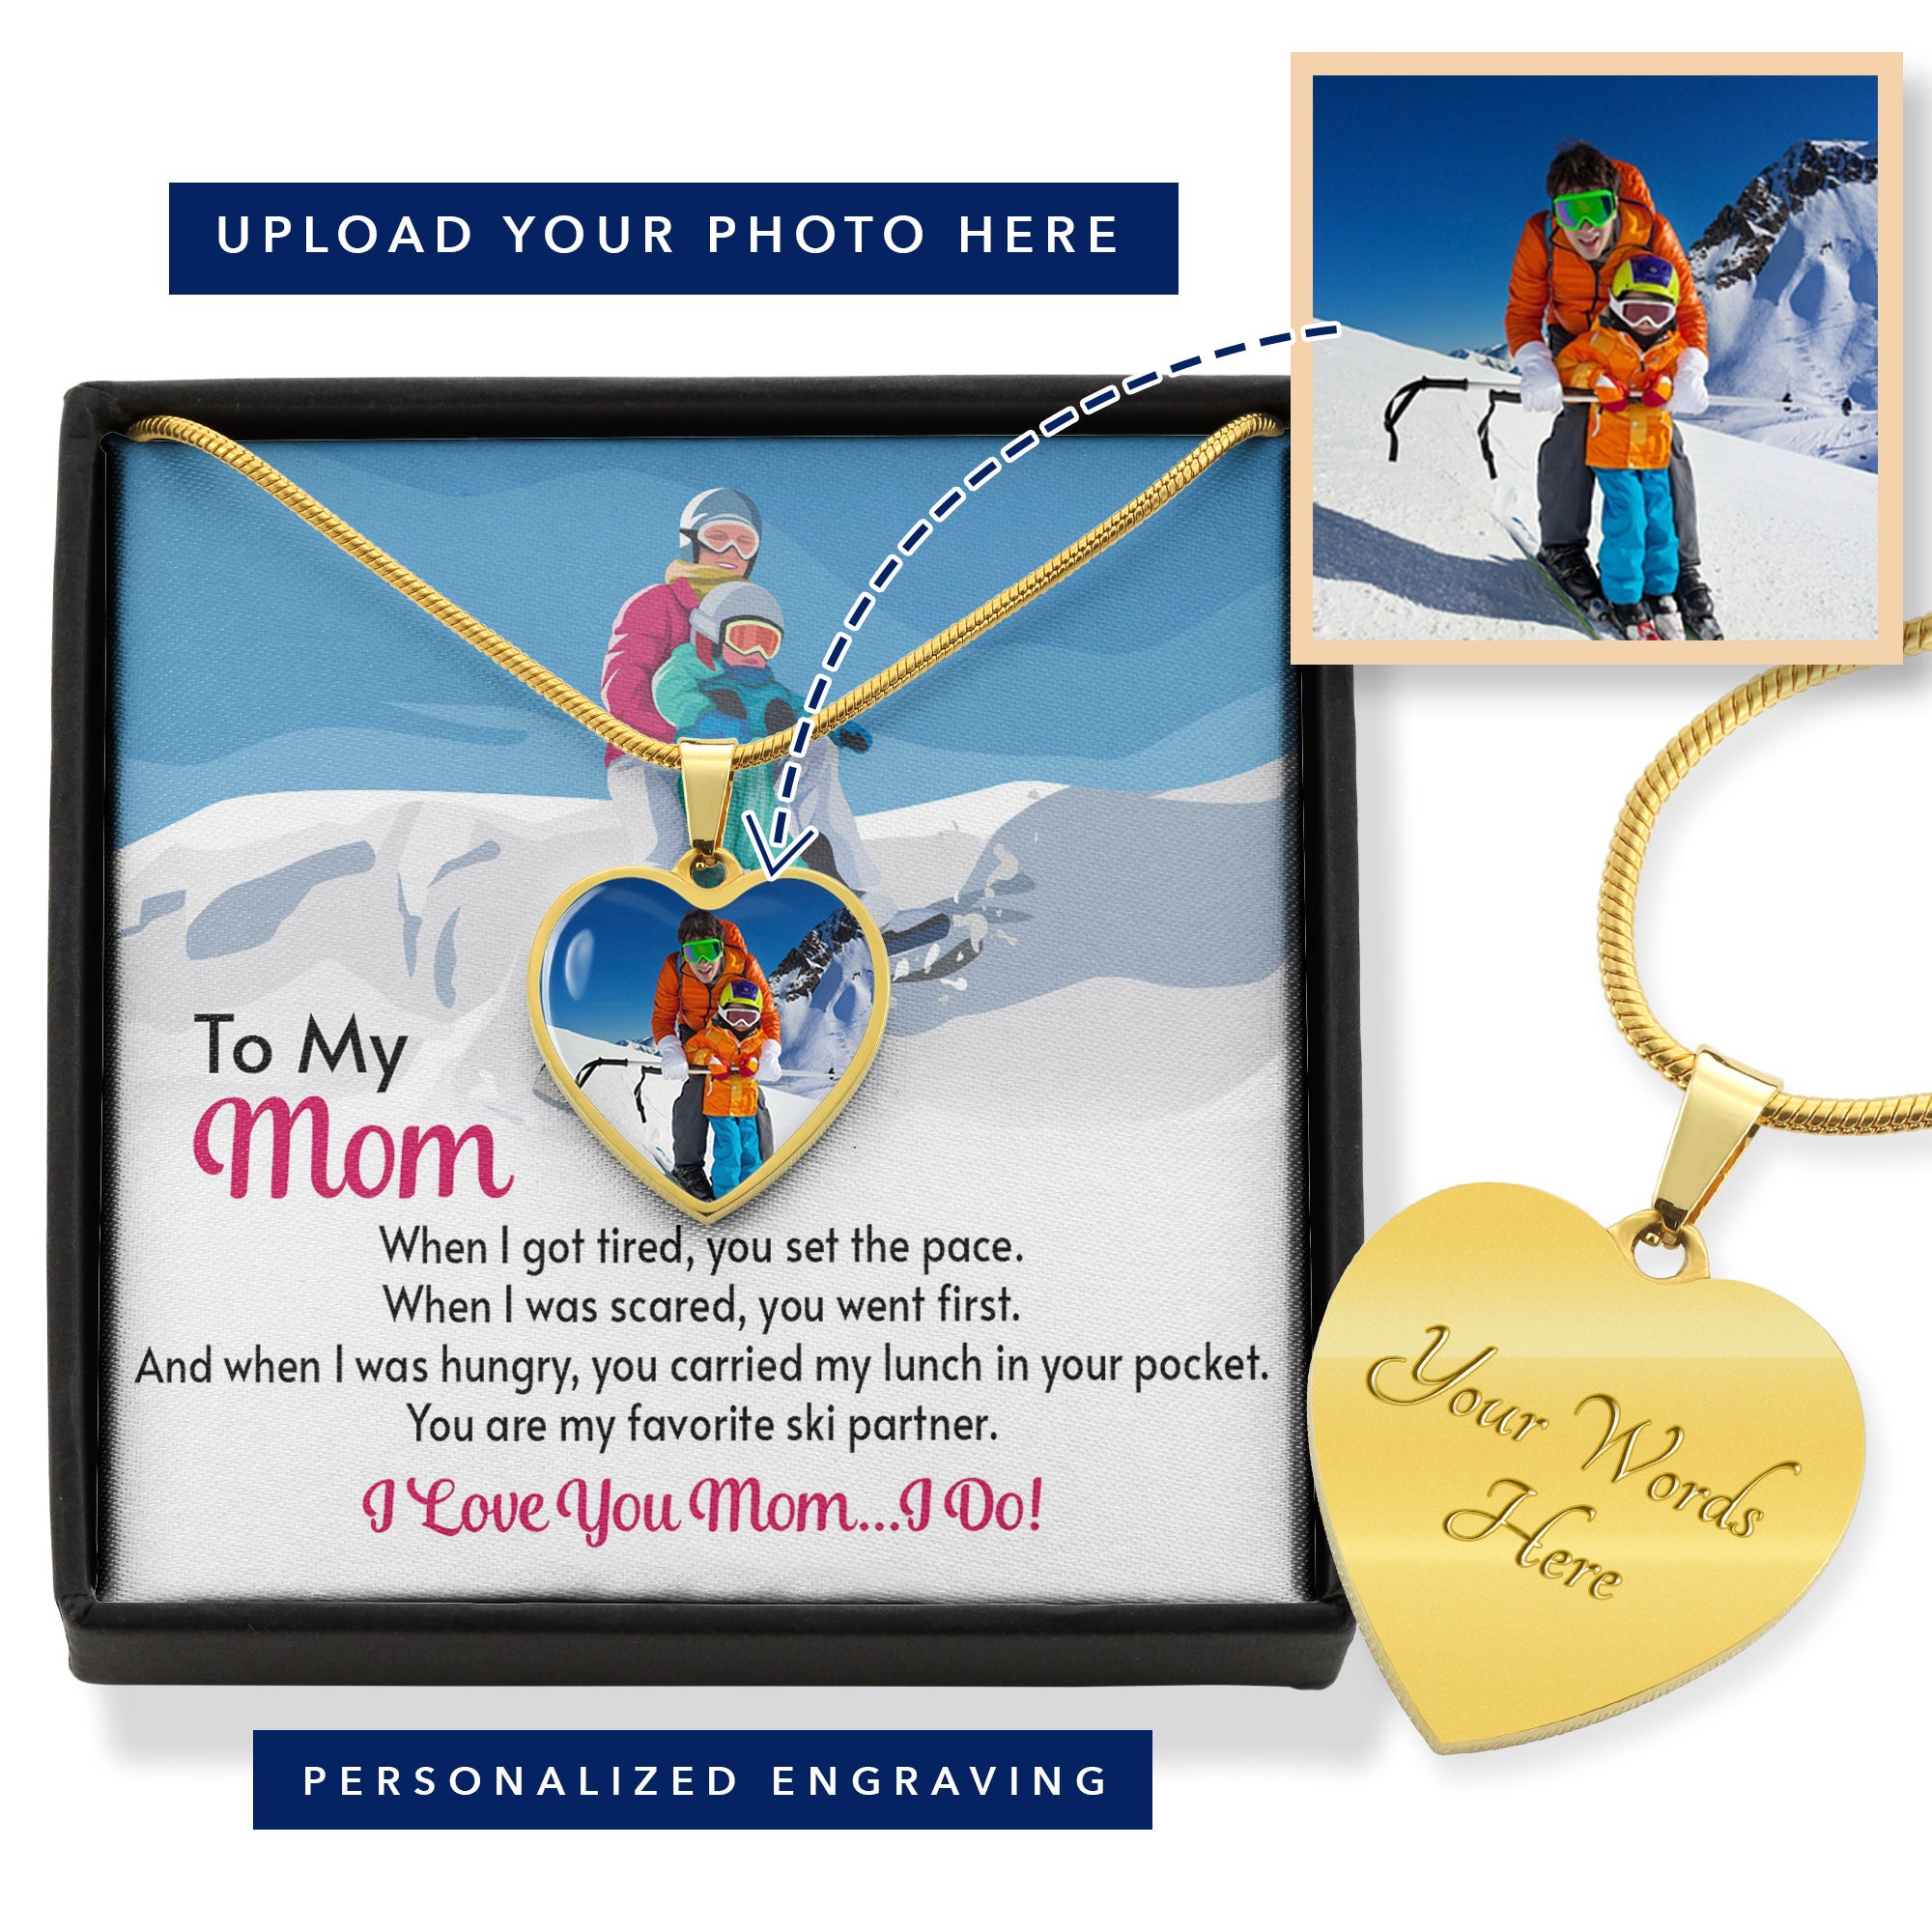 PERSONALIZED Photo Pendant for Moms: When I Got Tired, You Set The Pace - Powderaddicts